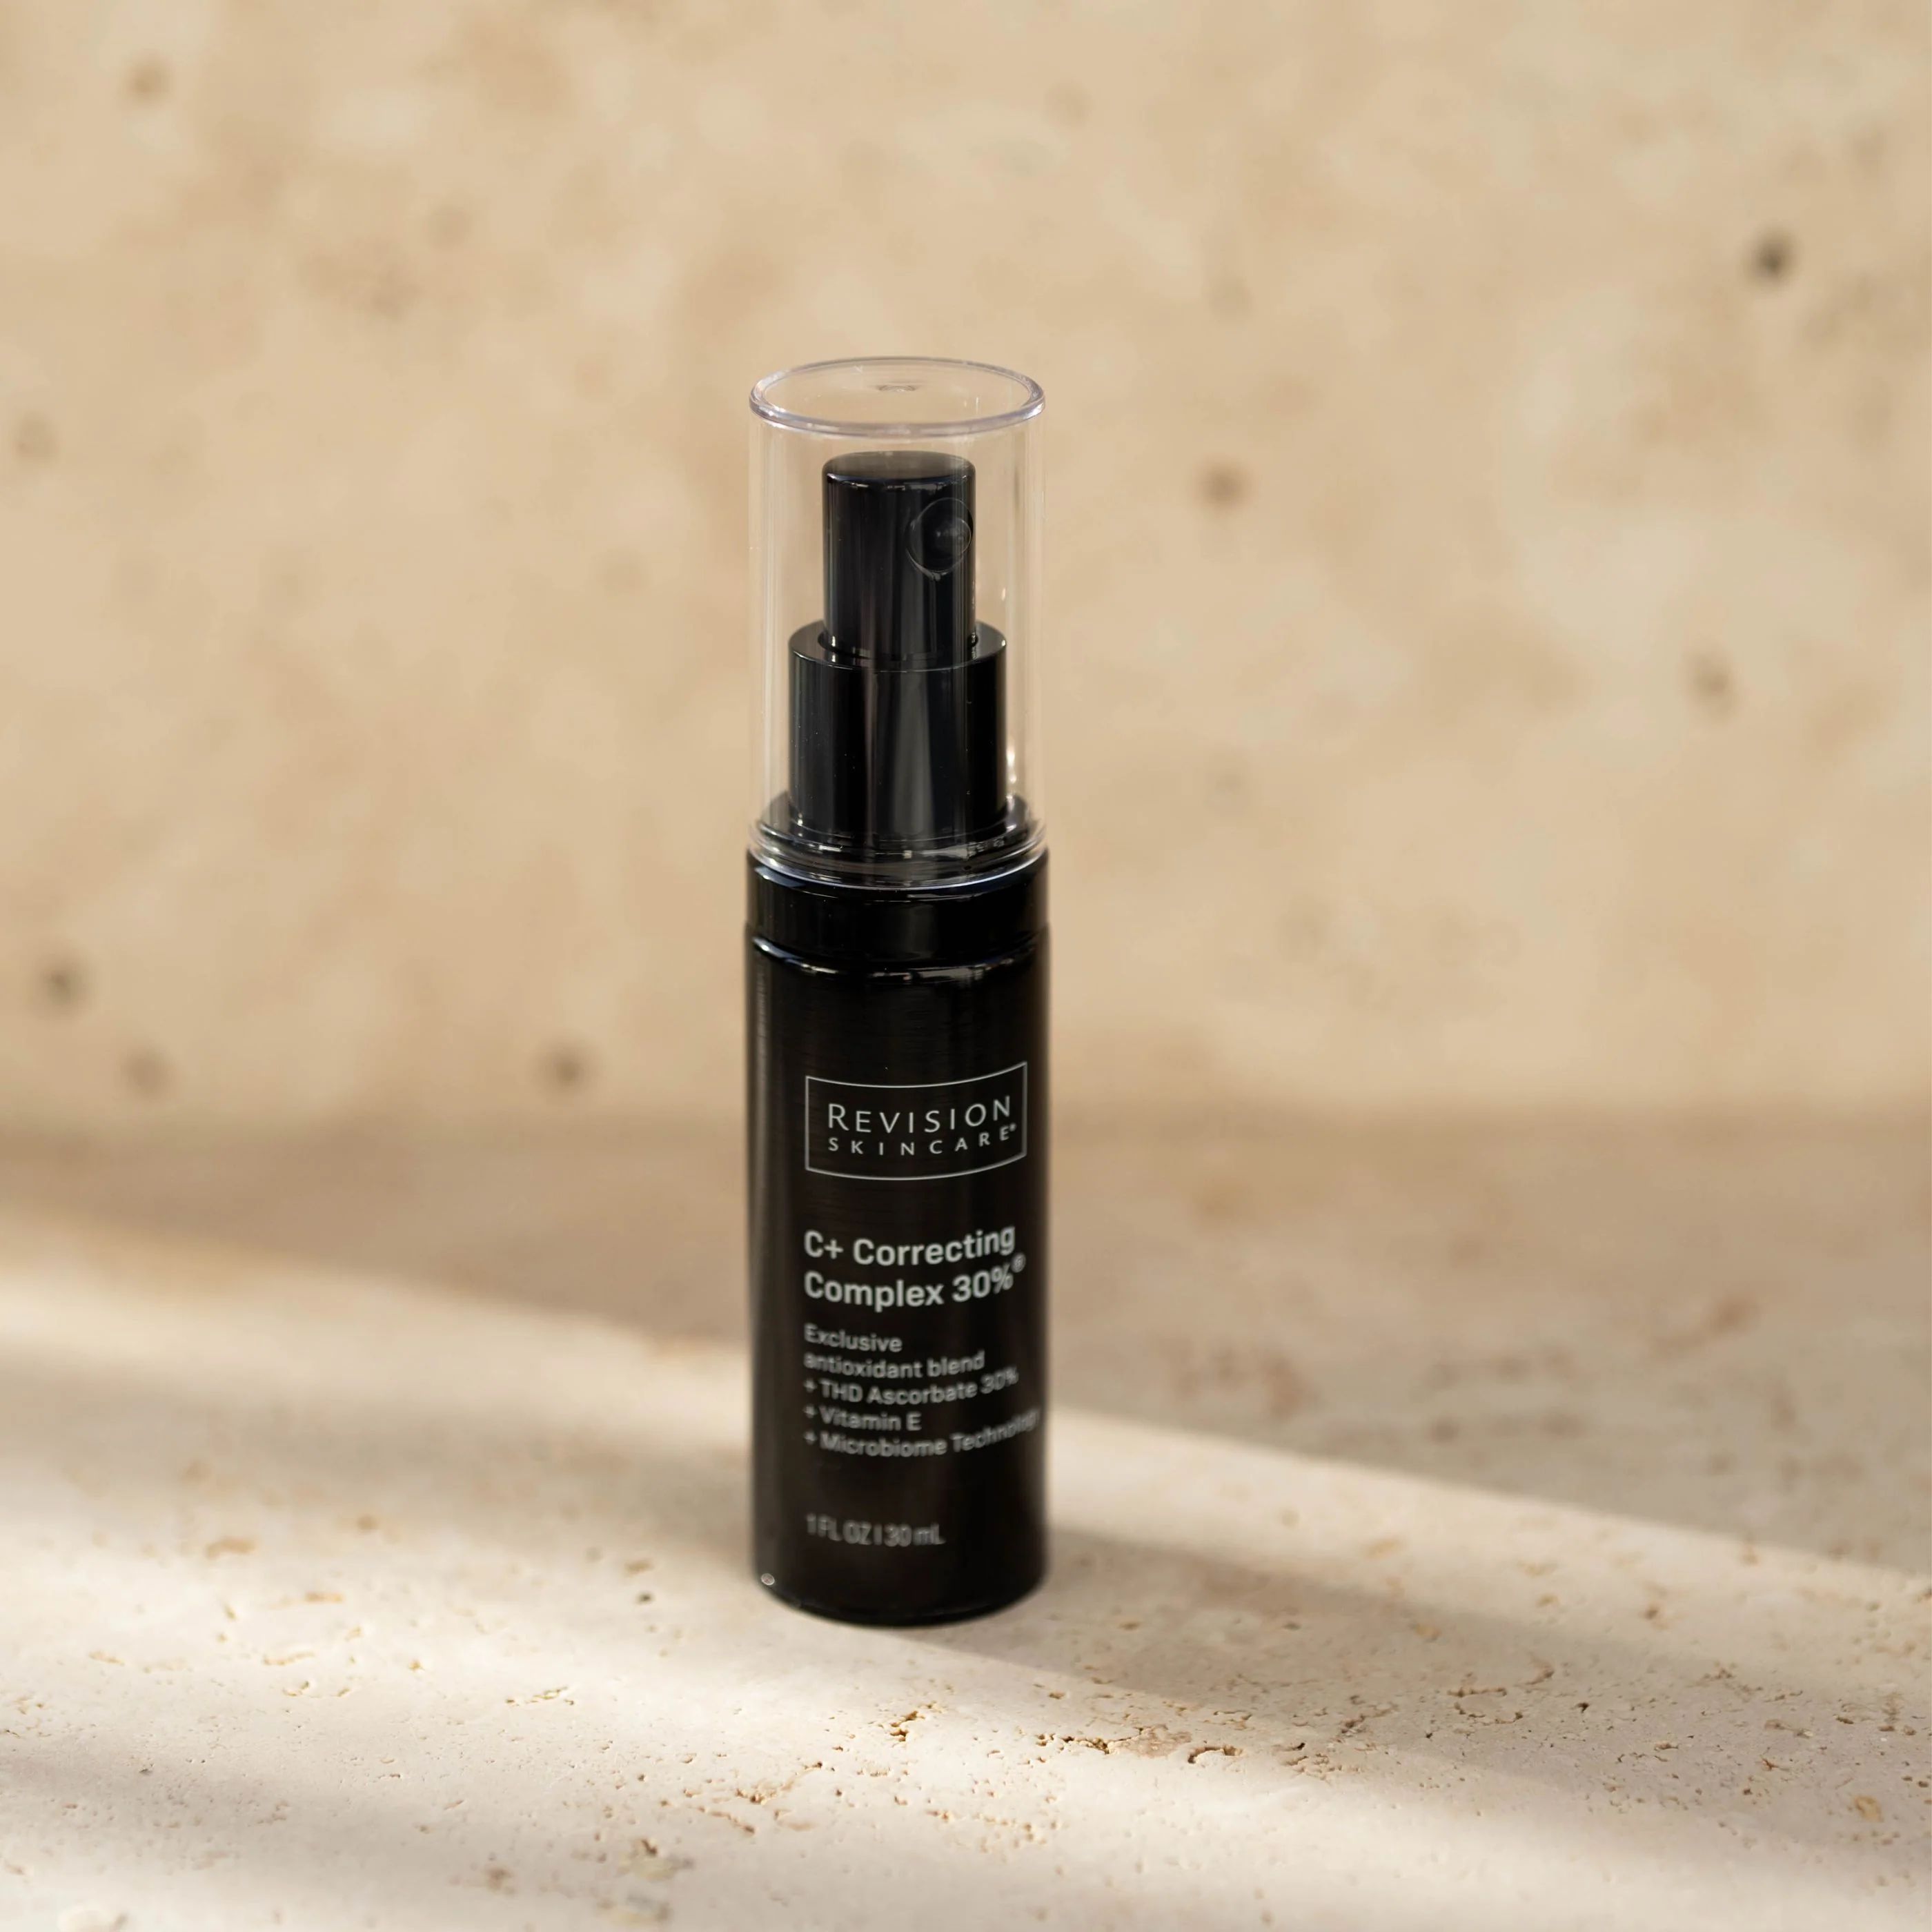 C+ Correcting Complex 30% | Barefaced